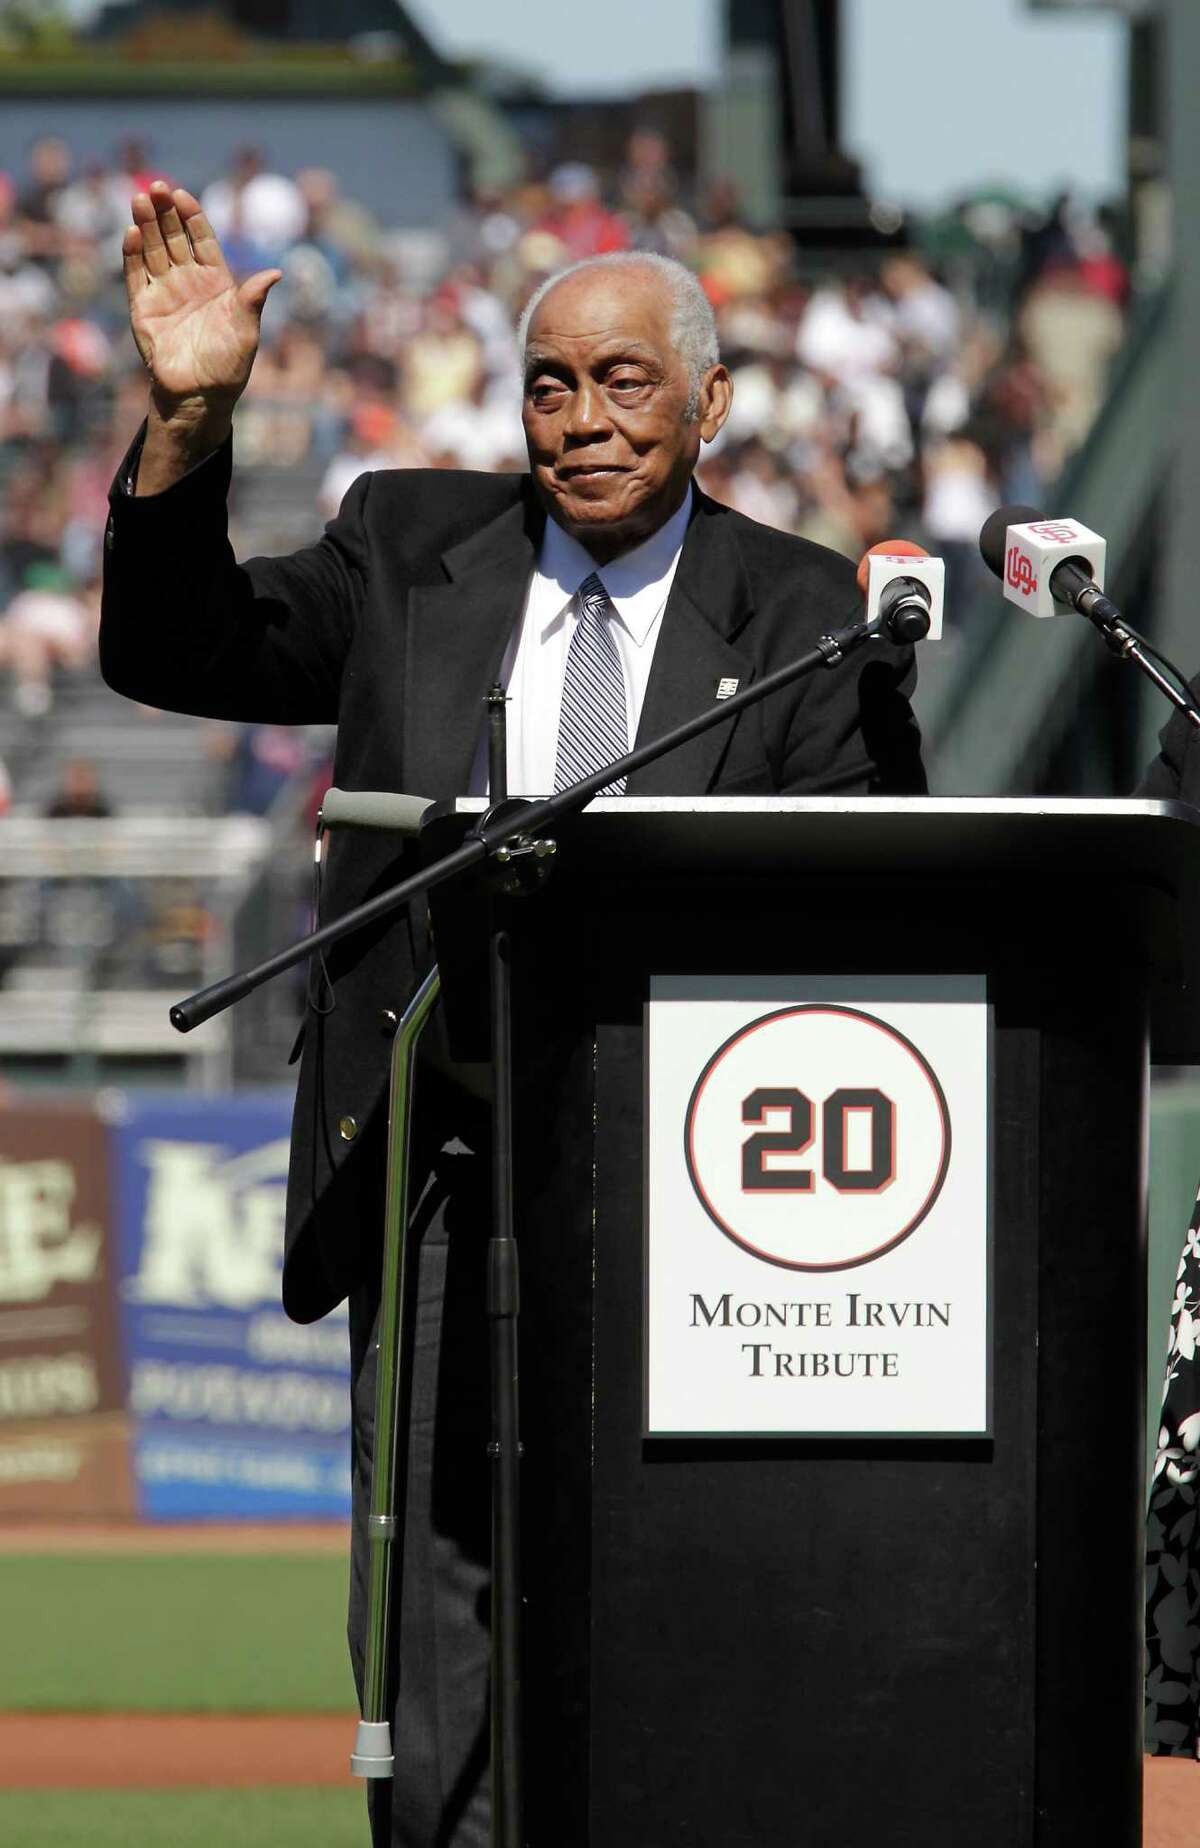 Former Giants Hall of Famer Monte Irvin, waves to the crowd as he had his jersey retired by the San Francisco Giants during a special pre-game ceremony before the Boston Red Sox interleague baseball game in San Francisco, Saturday, June 26, 2010. (AP Photo/ Tony Avelar)